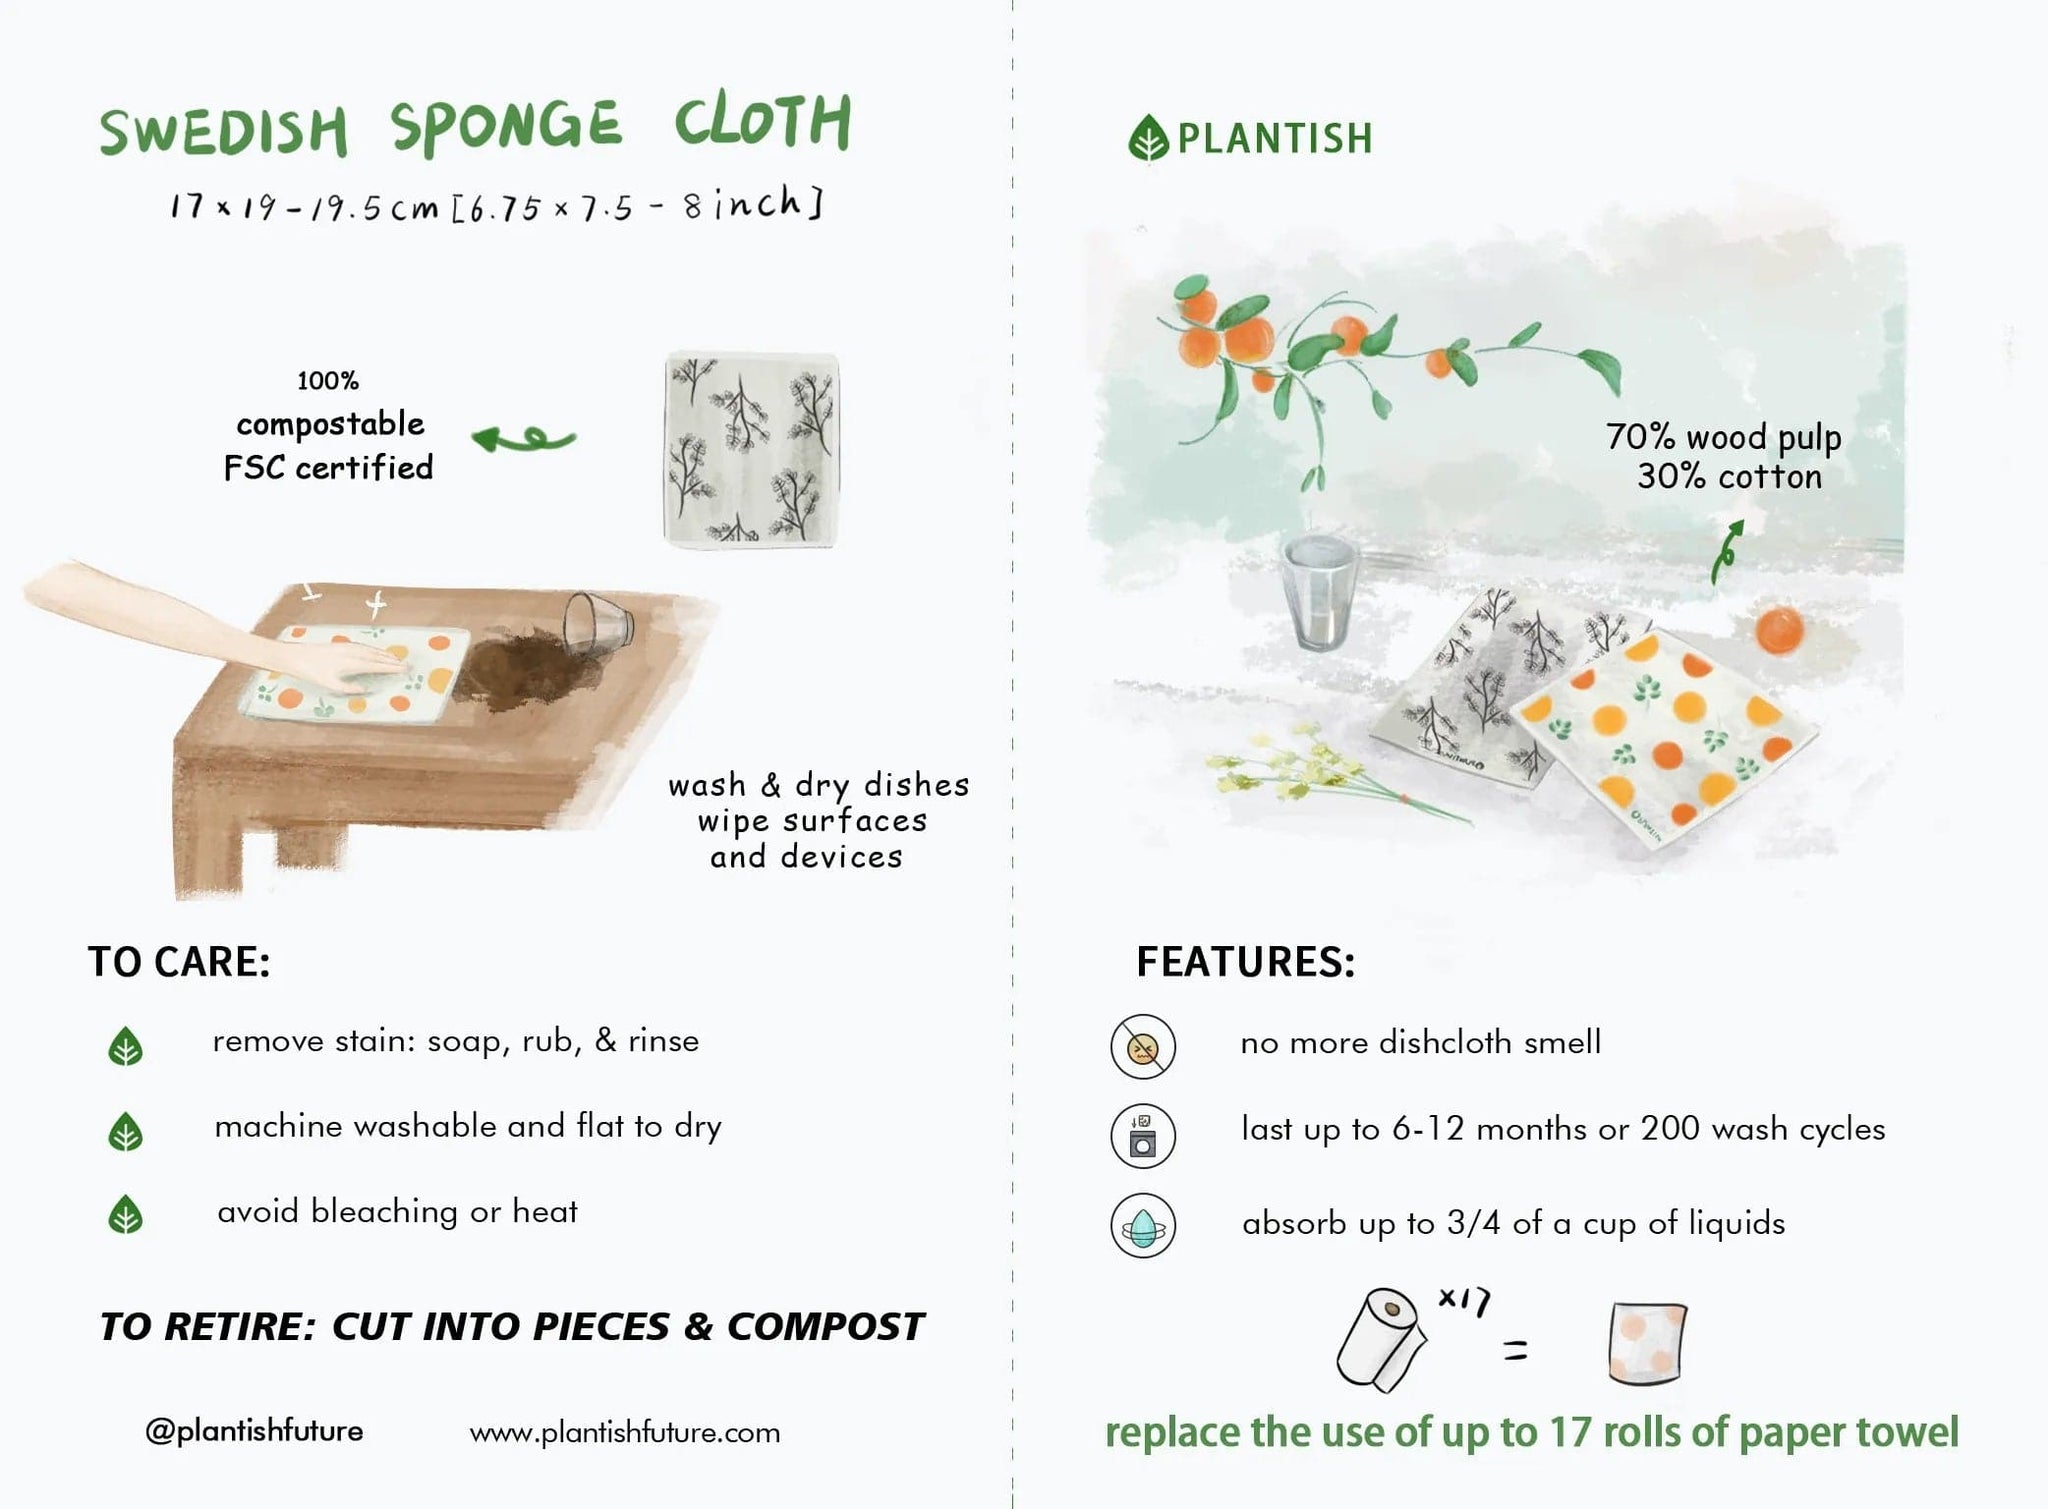 Care tips infographic for Swedish sponge cloth. Replace the use of up to 17 rolls of paper towel. 100% compostable and plastic free.